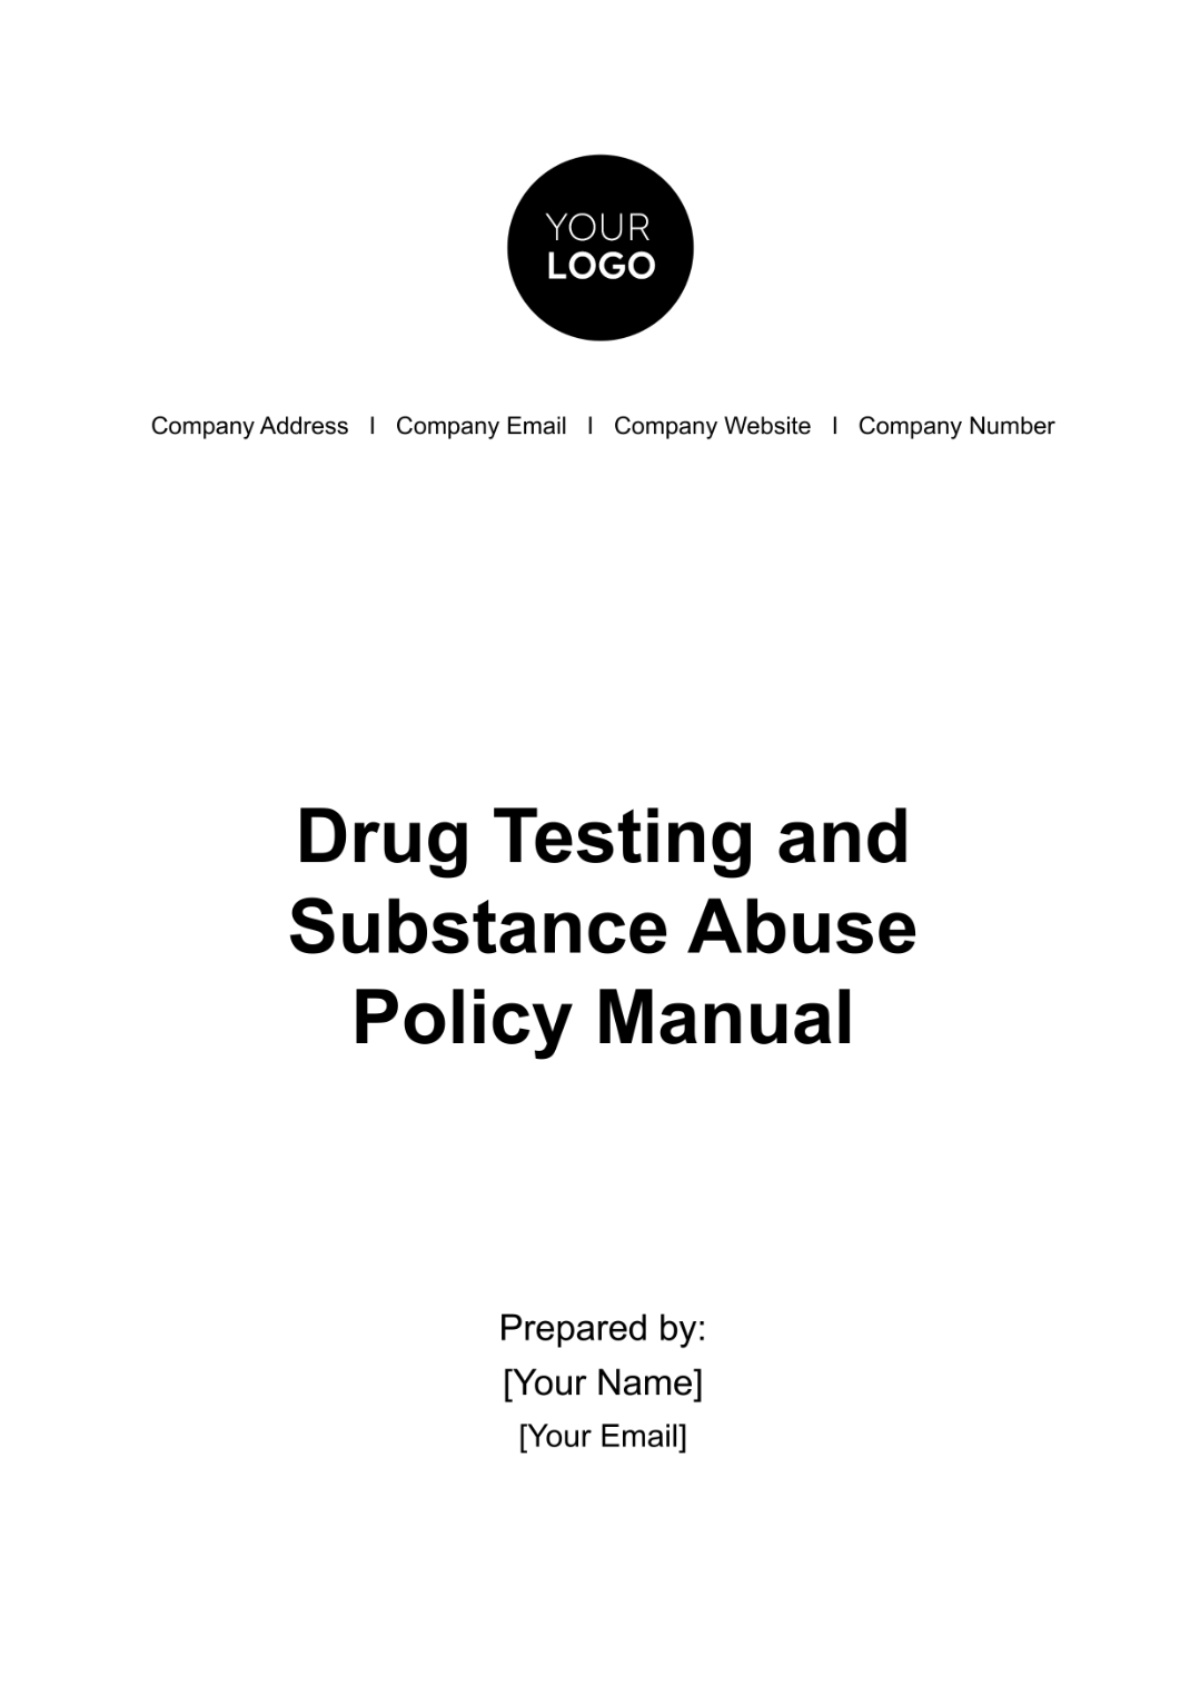 Free Drug Testing and Substance Abuse Policy Manual HR Template